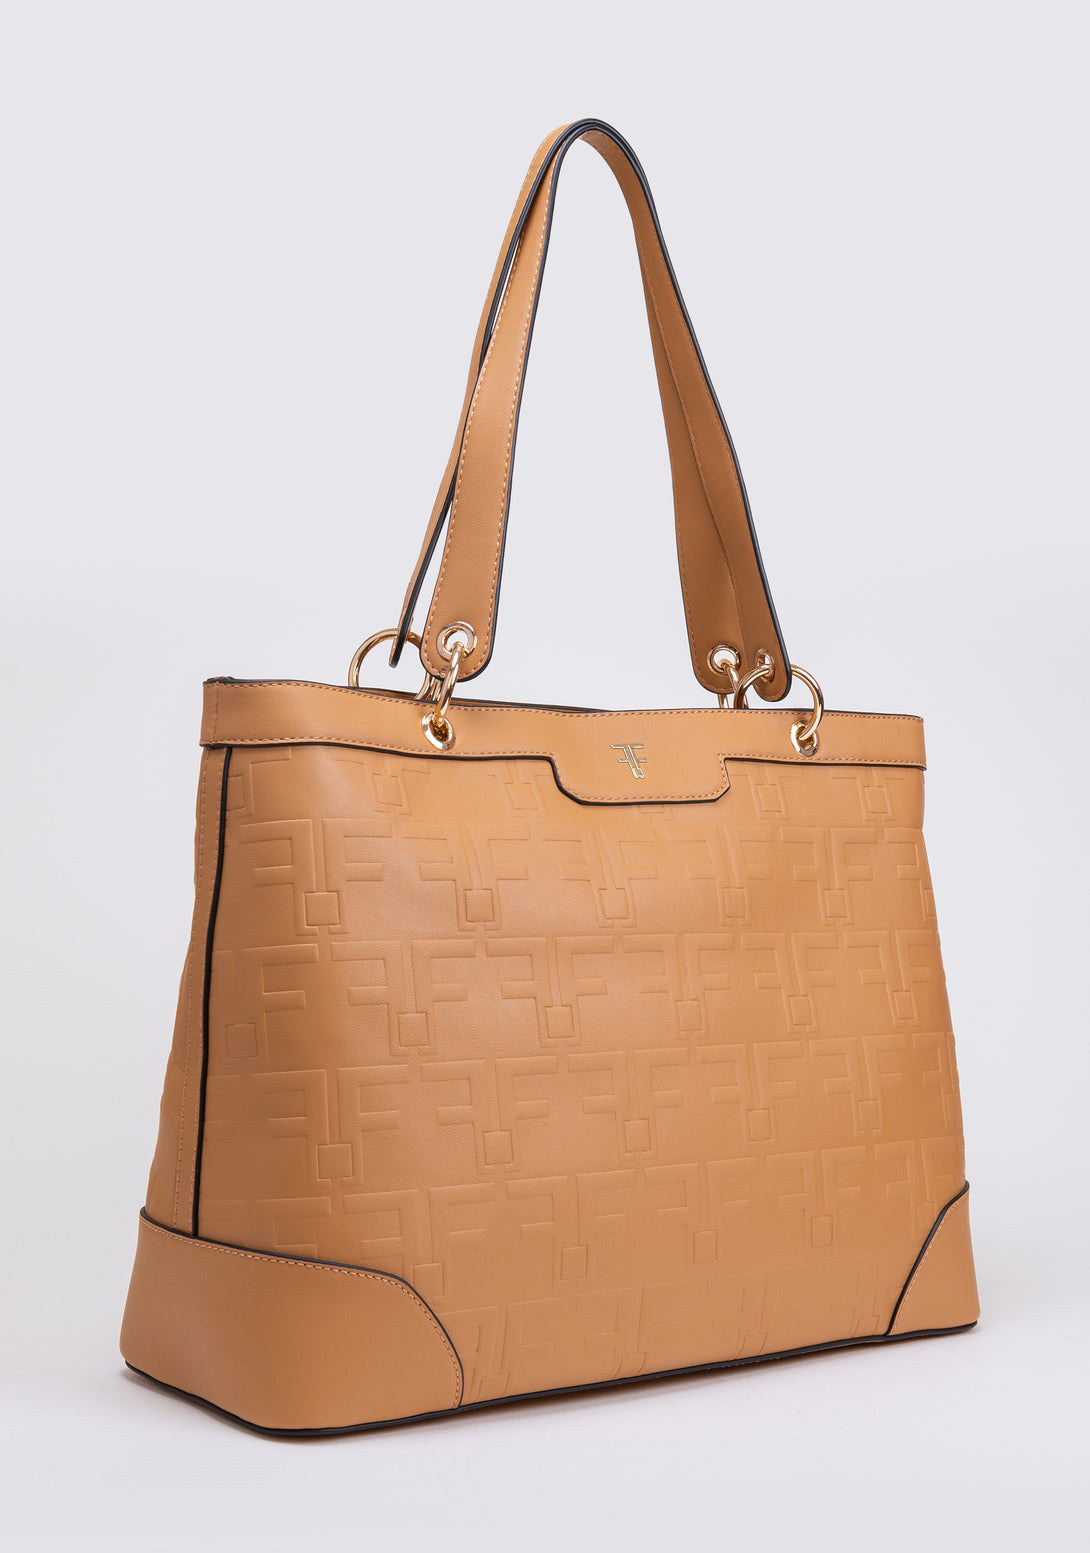 Shopping bag made in eco leather with logo